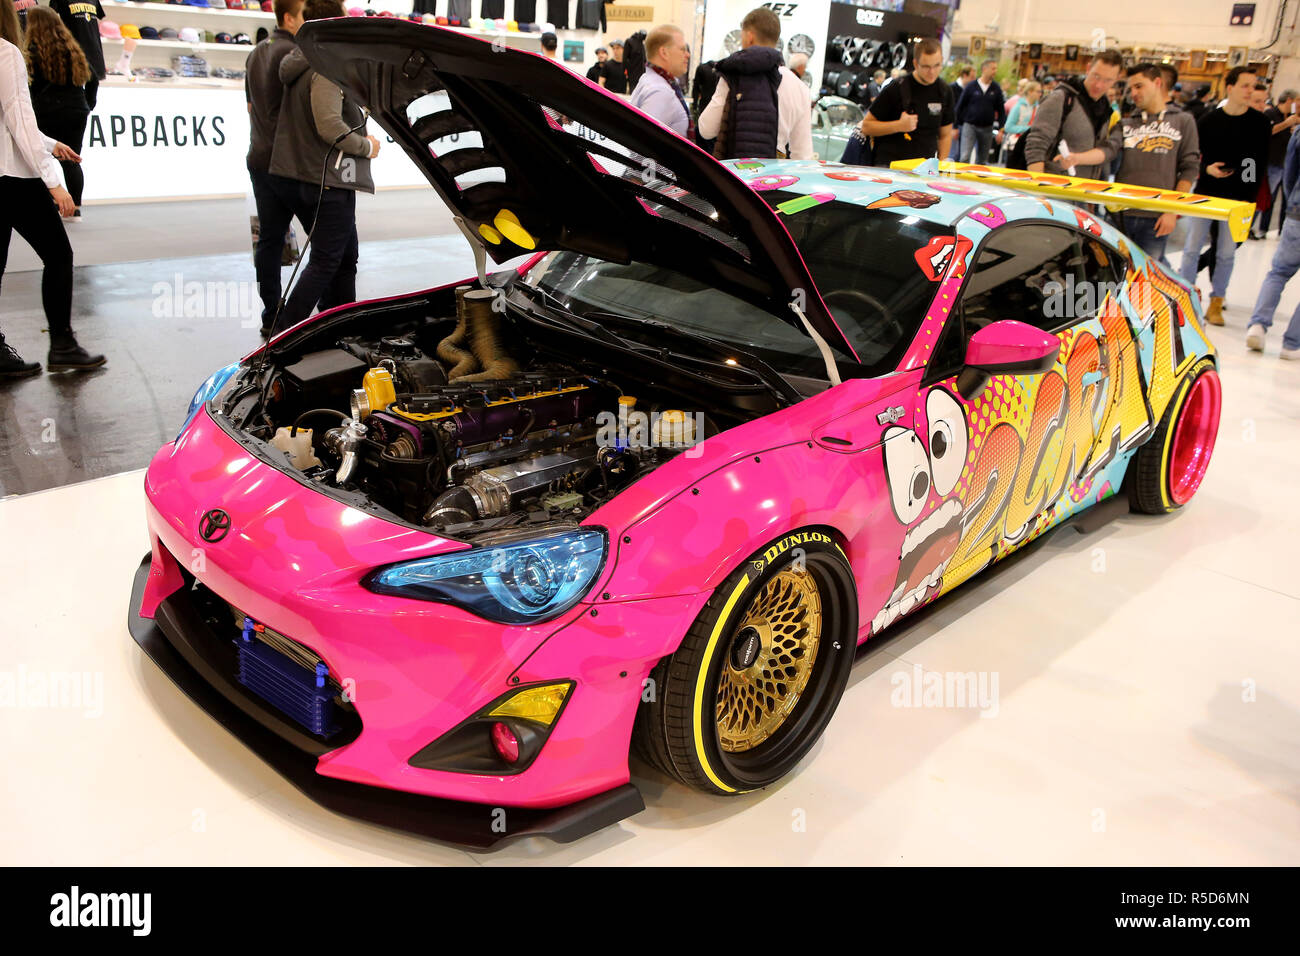 Essen, Germany. 30th Nov, 2018. Toyota GT86 on display at the Essen Motor  Show Preview Day on November 30, 2018 at the fair grounds in Essen,  Germany. The motor show presents motorcycles,